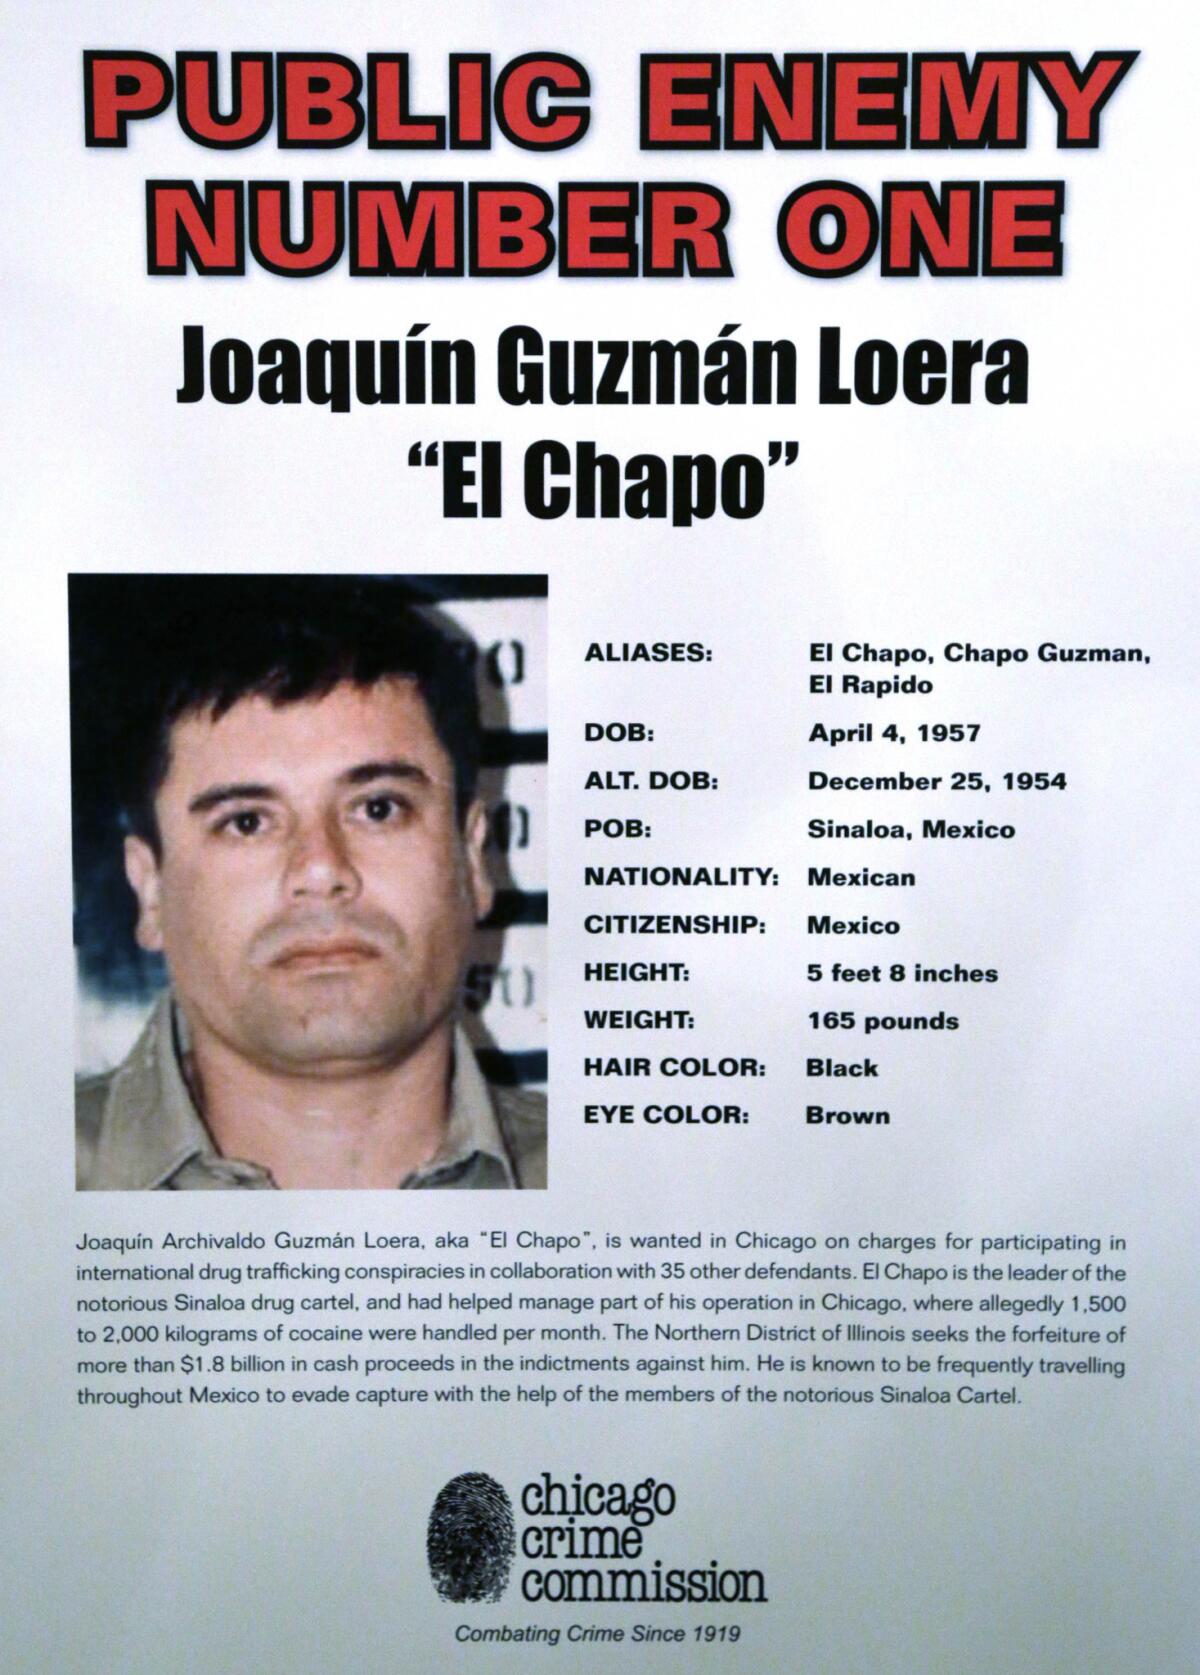 A poster displayed at a Chicago Crime Commission news conference in Chicago, where Joaquin 'El Chapo' Guzman, a drug kingpin in Mexico, was named as Chicago's Public Enemy No. 1.